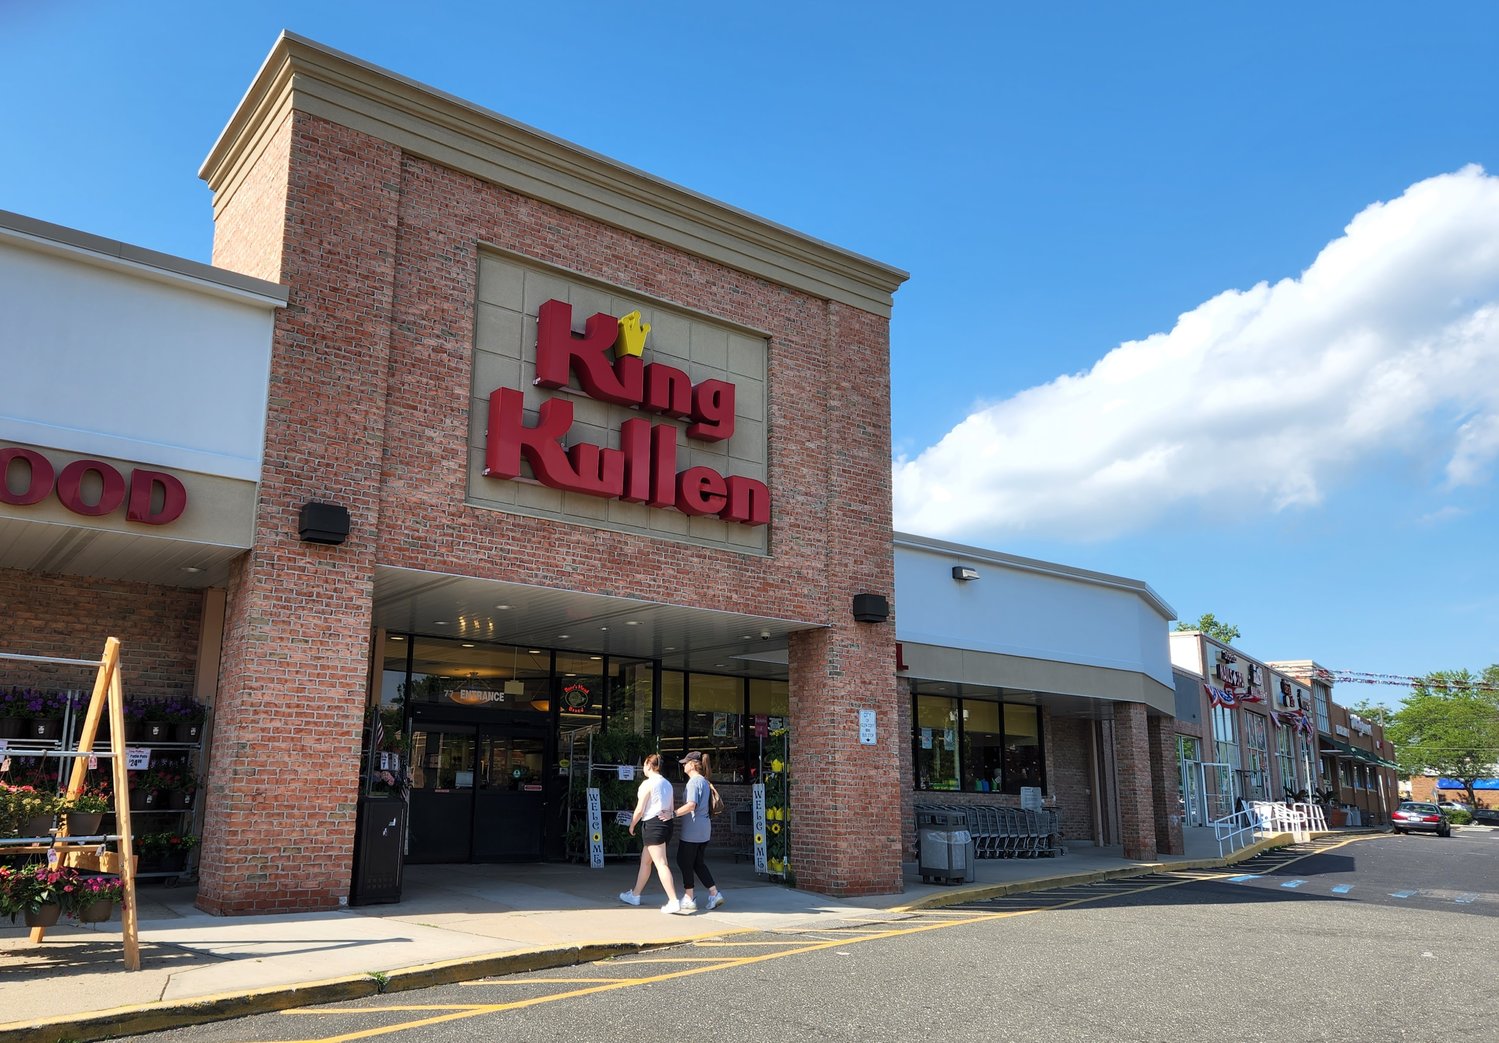 Neither the corporate office nor the property landlord would say why the Glen Cove King Kullen will close for good on July 28.